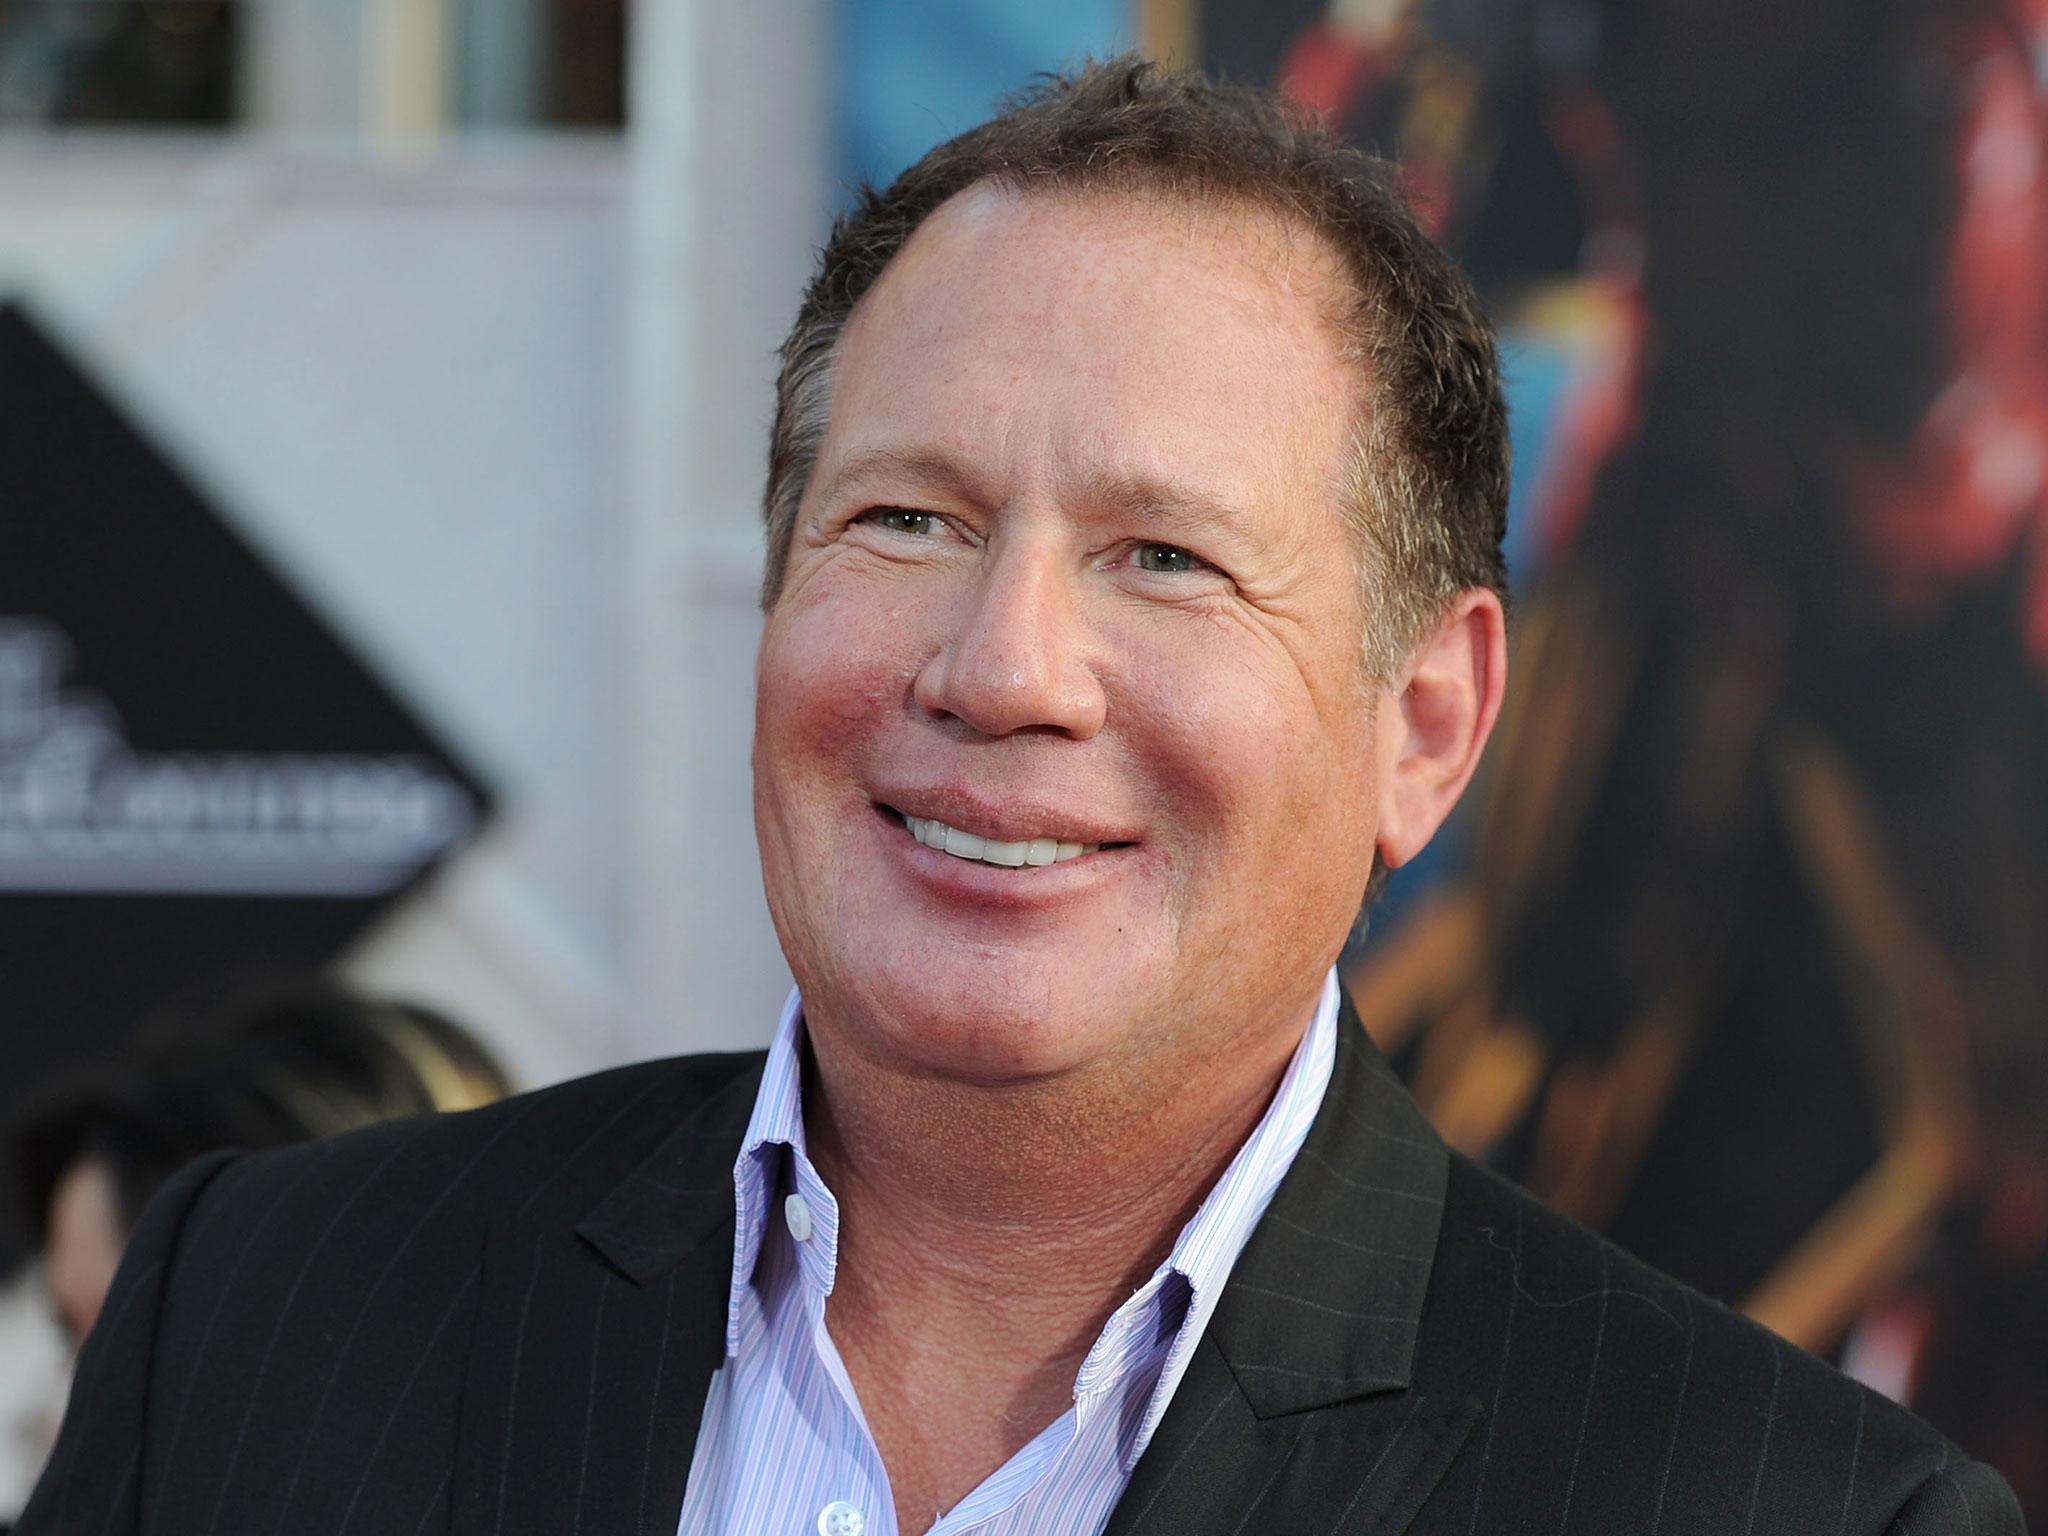 Shandling, who died of an apparent heart attack, kept his personal life private